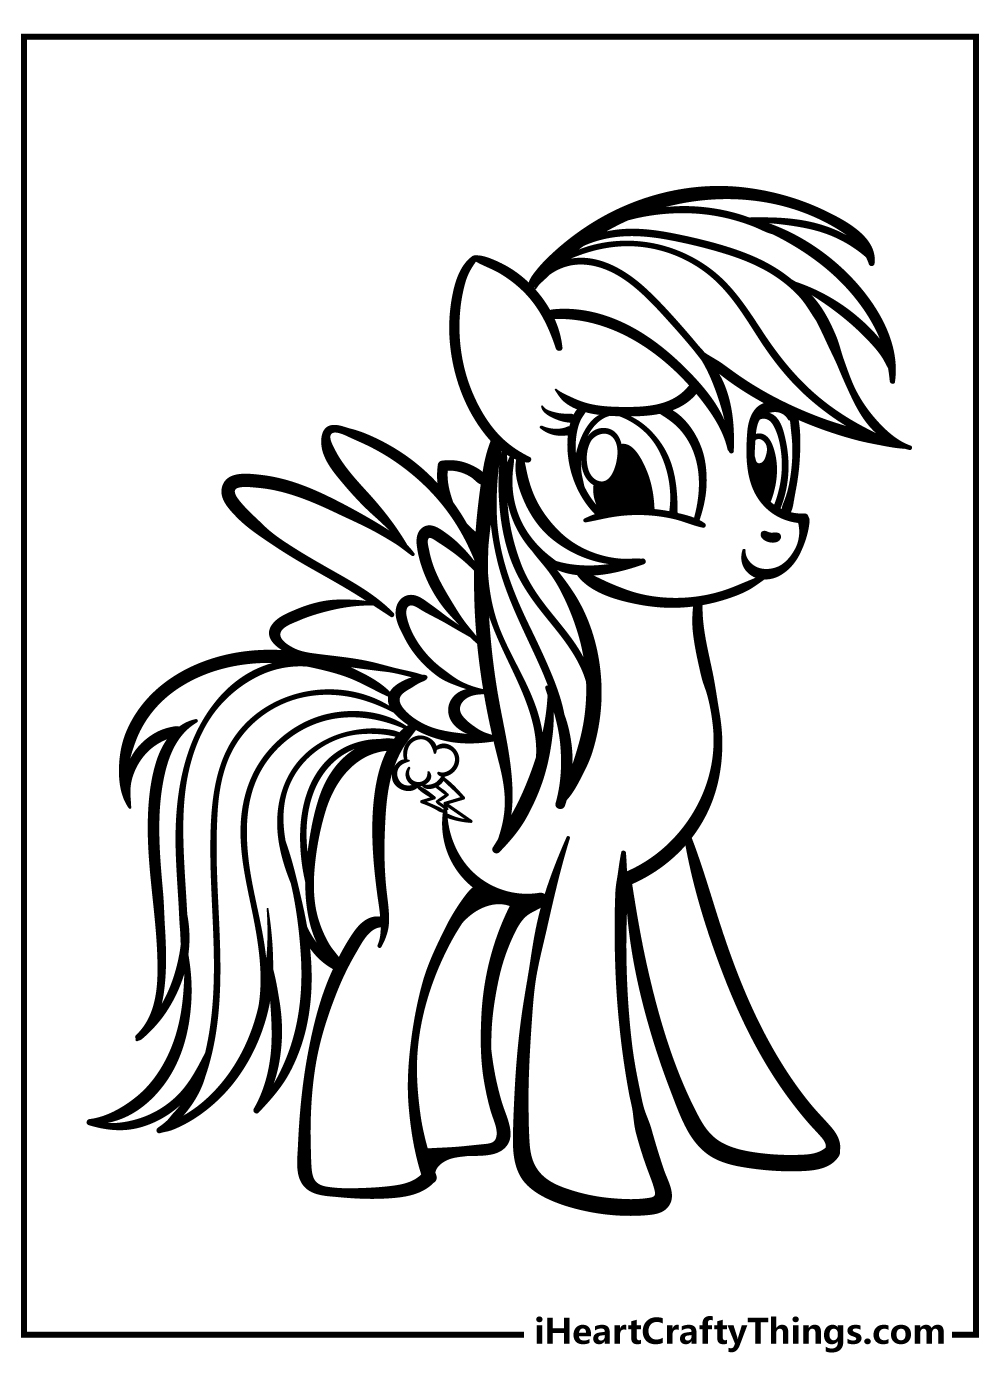 Printable Rainbow Dash Coloring Pages Updated 21